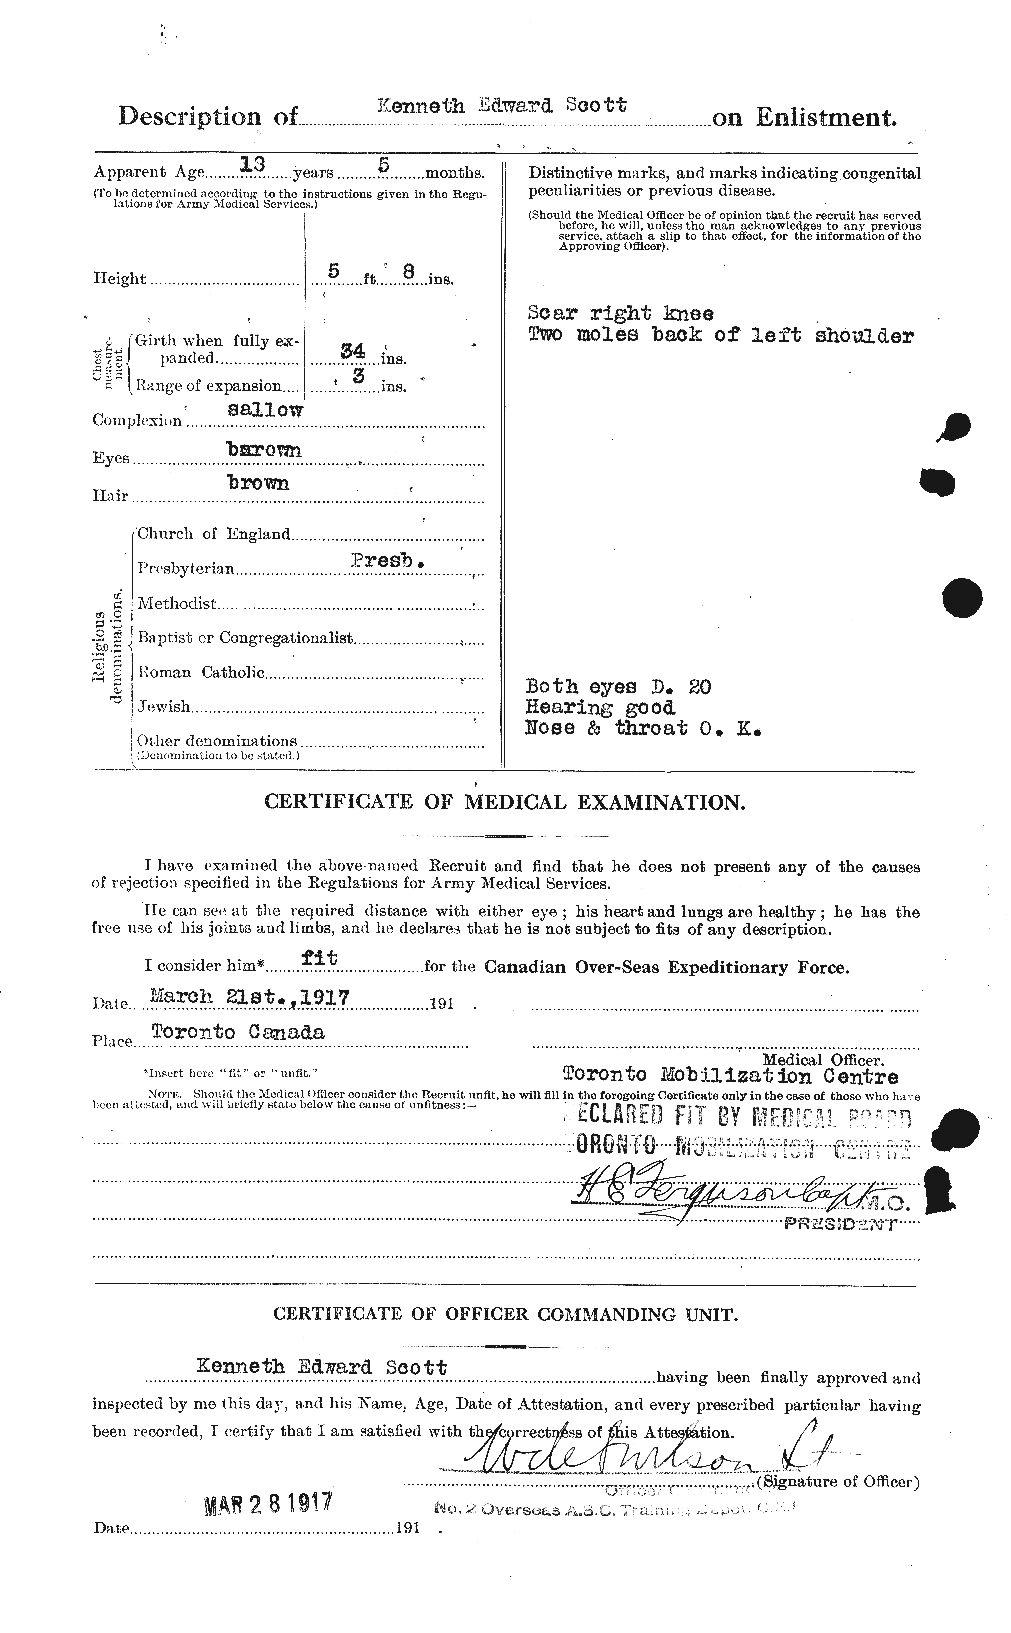 Personnel Records of the First World War - CEF 084153b